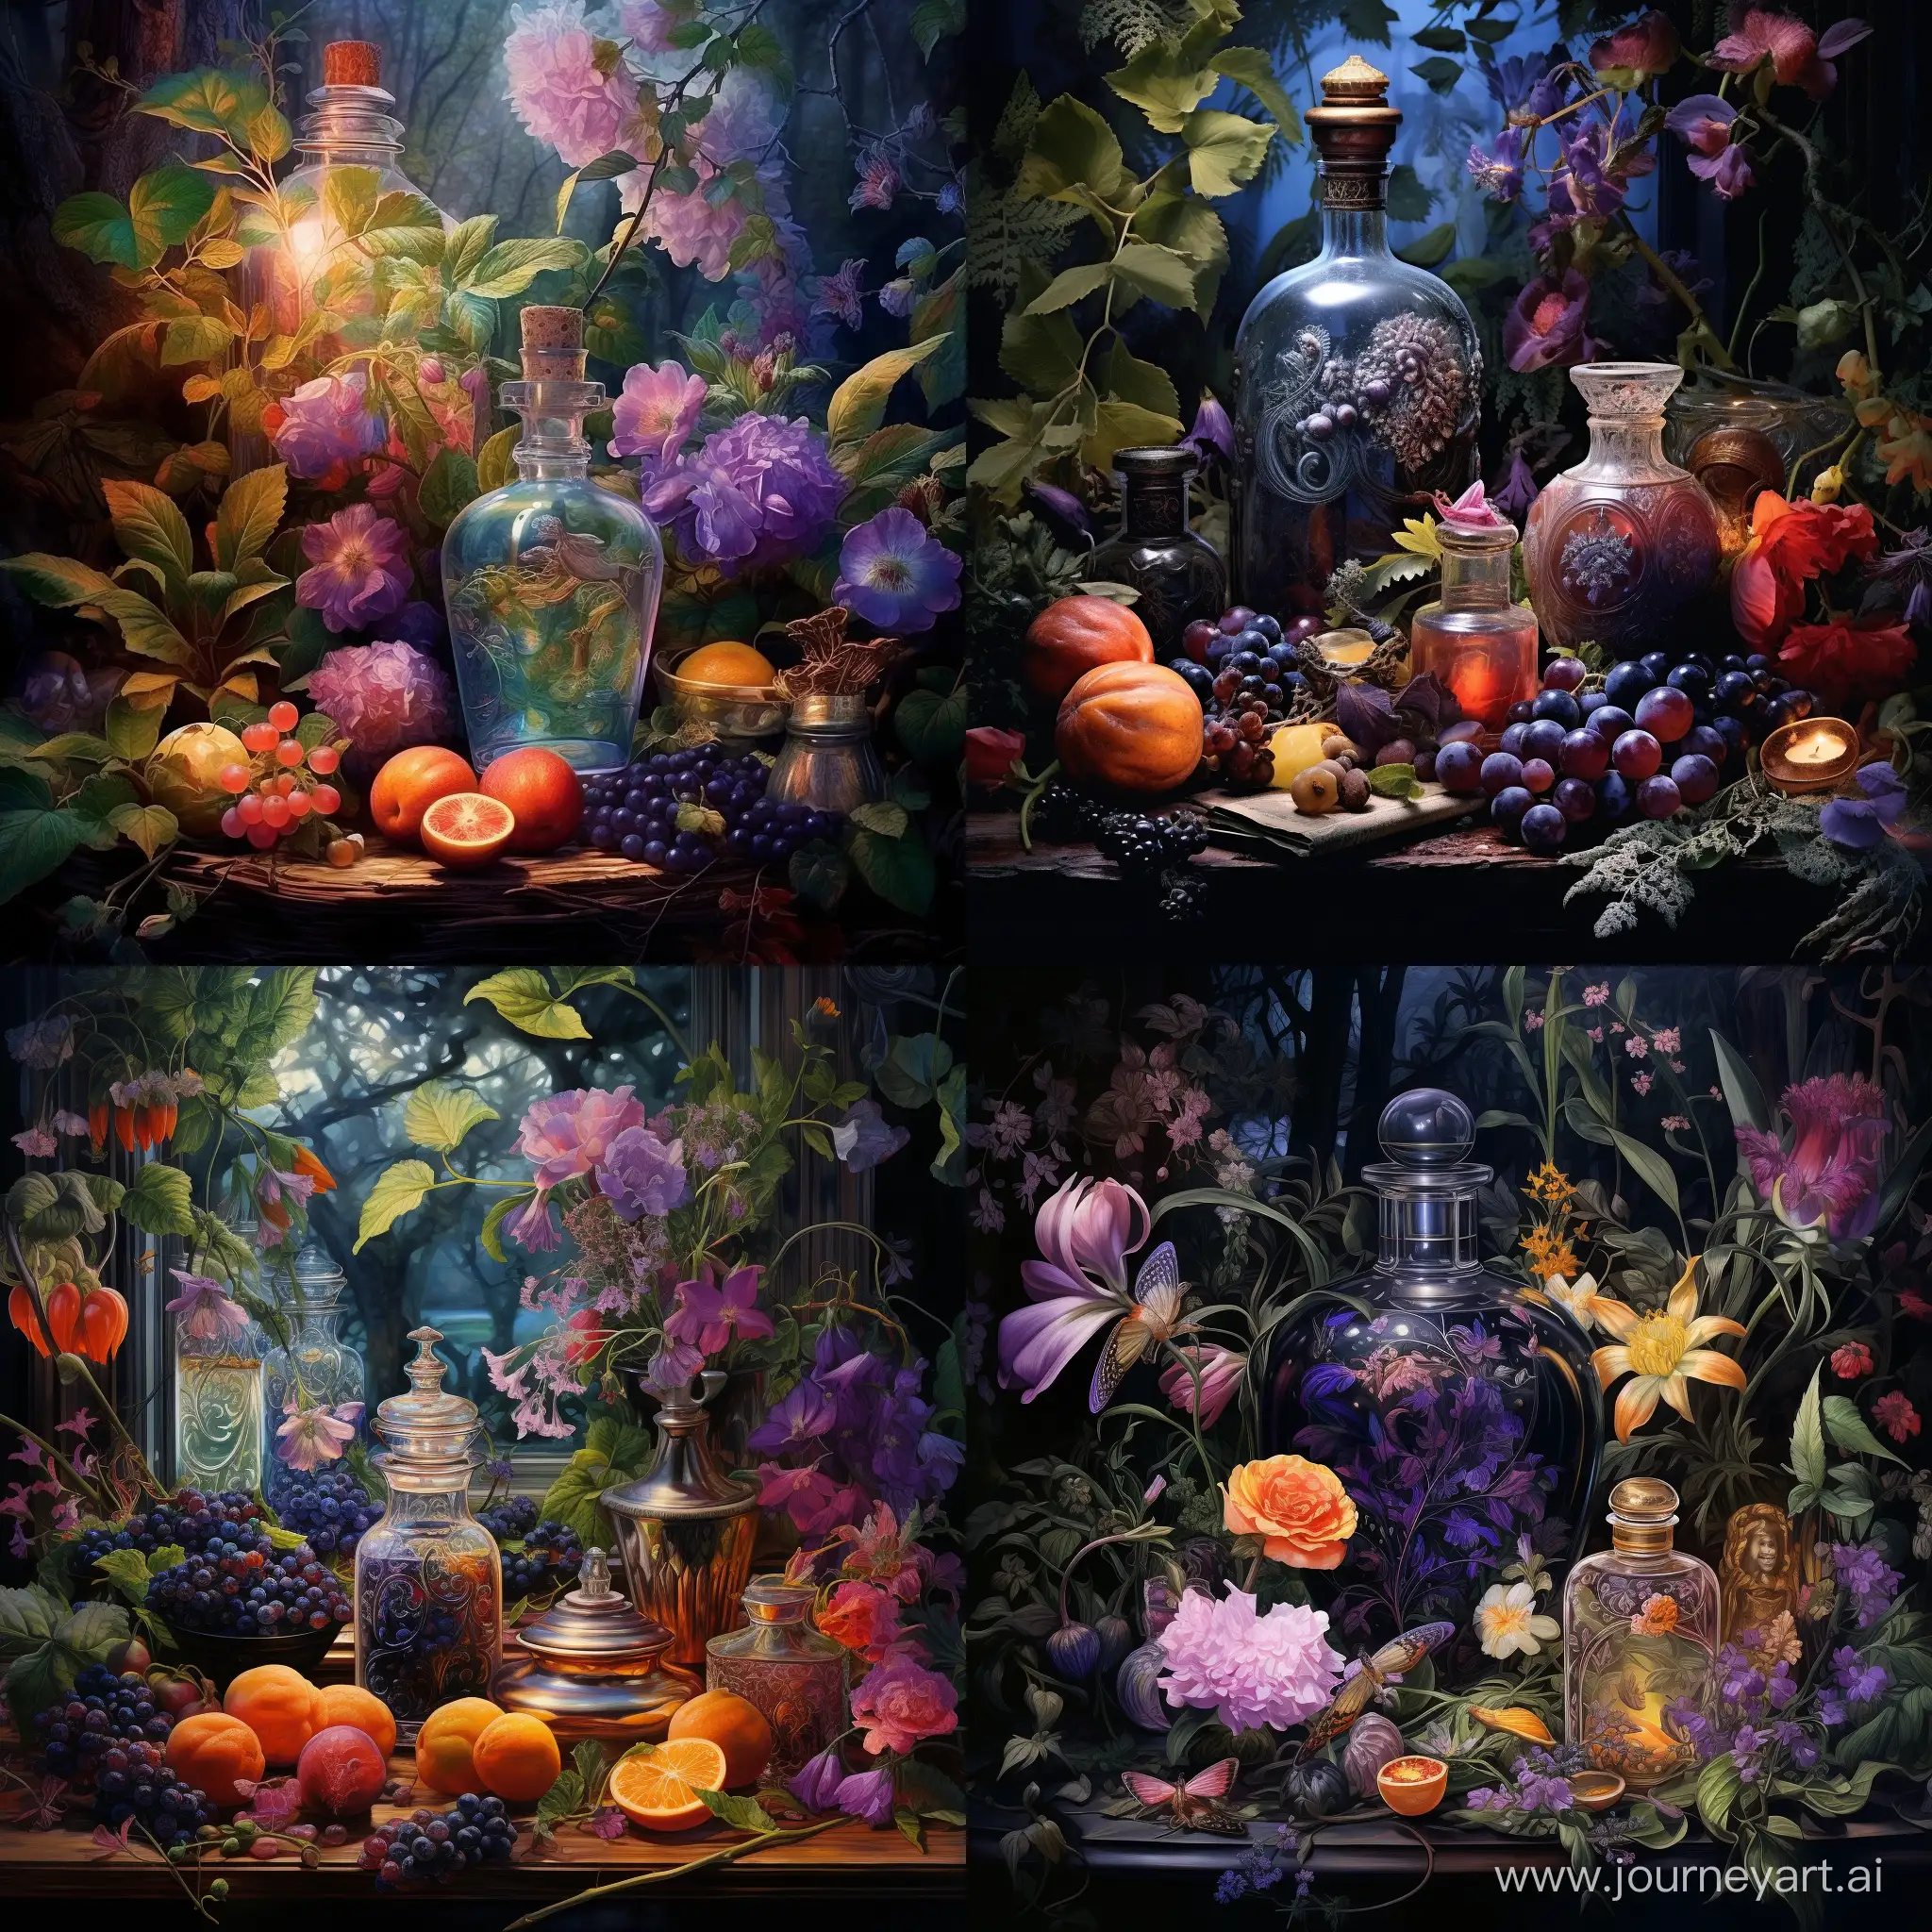 perfumes, medicinal herbs, rare flowers, goodies, fruits, nuts, realistic, detailed, dark iridescent background, atmosphere of magic and enchantment